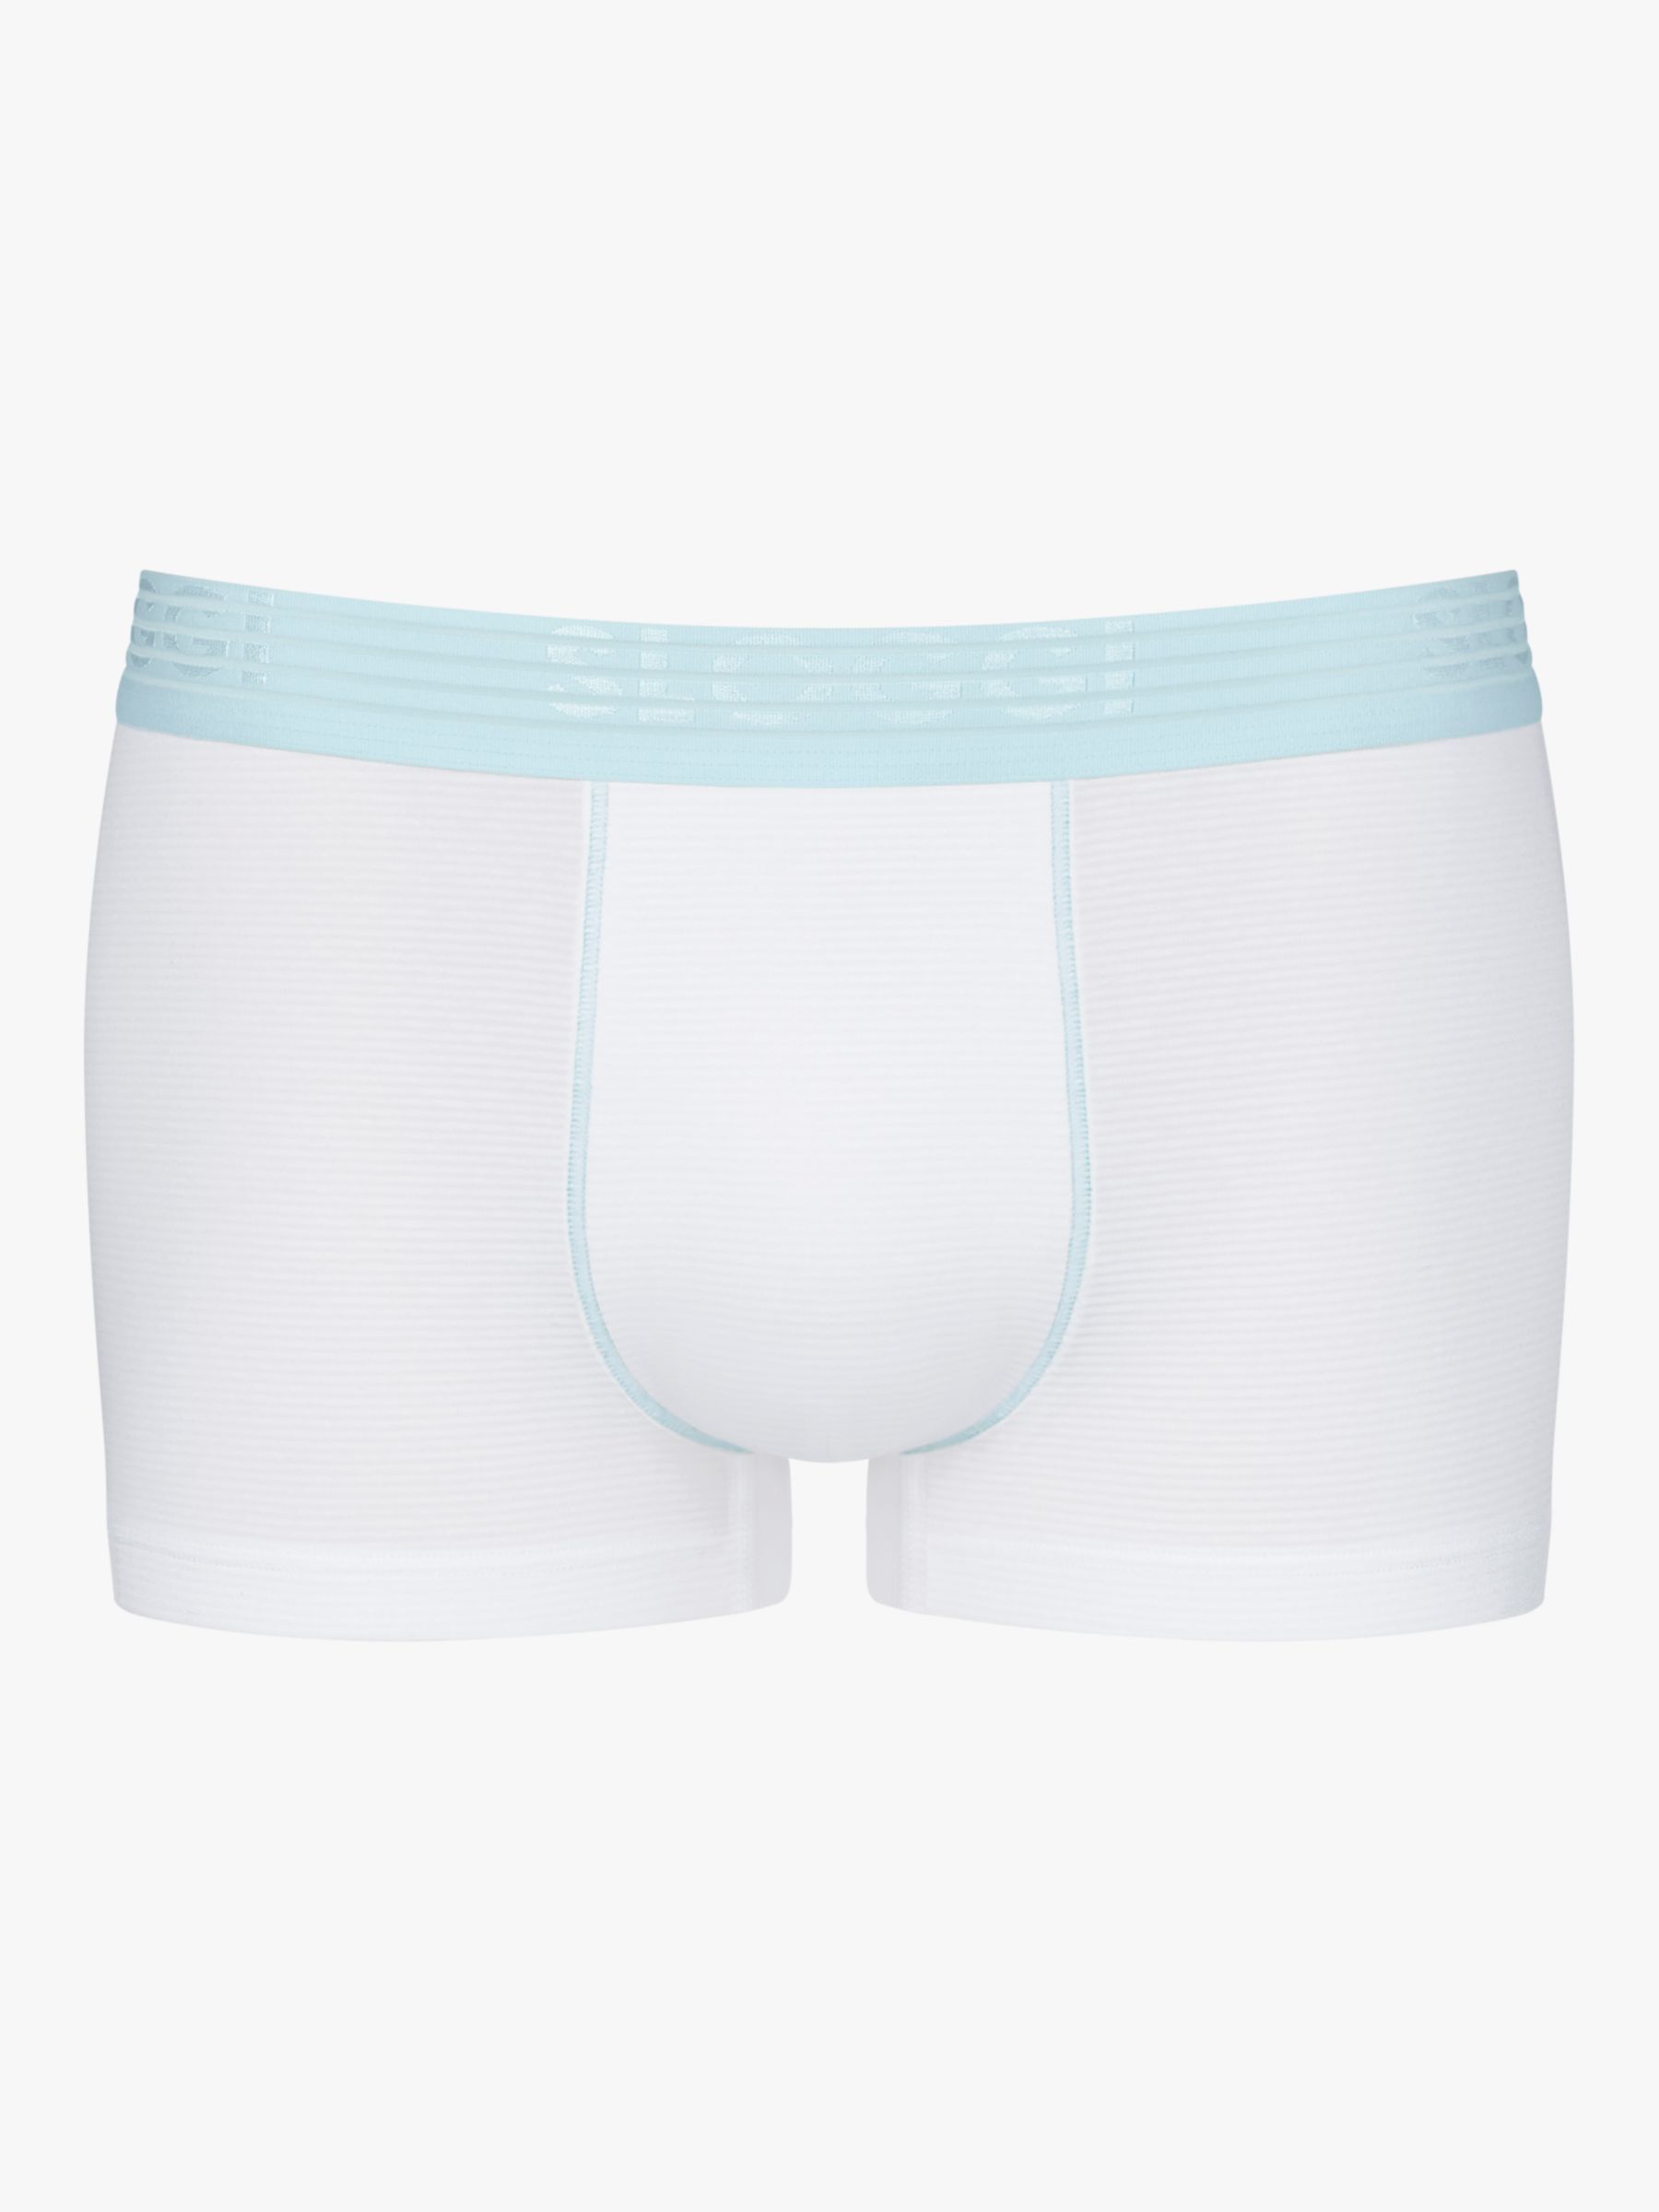 sloggi EVER Cool Cotton Stretch Hipster Trunks, Pack of 2, White, L